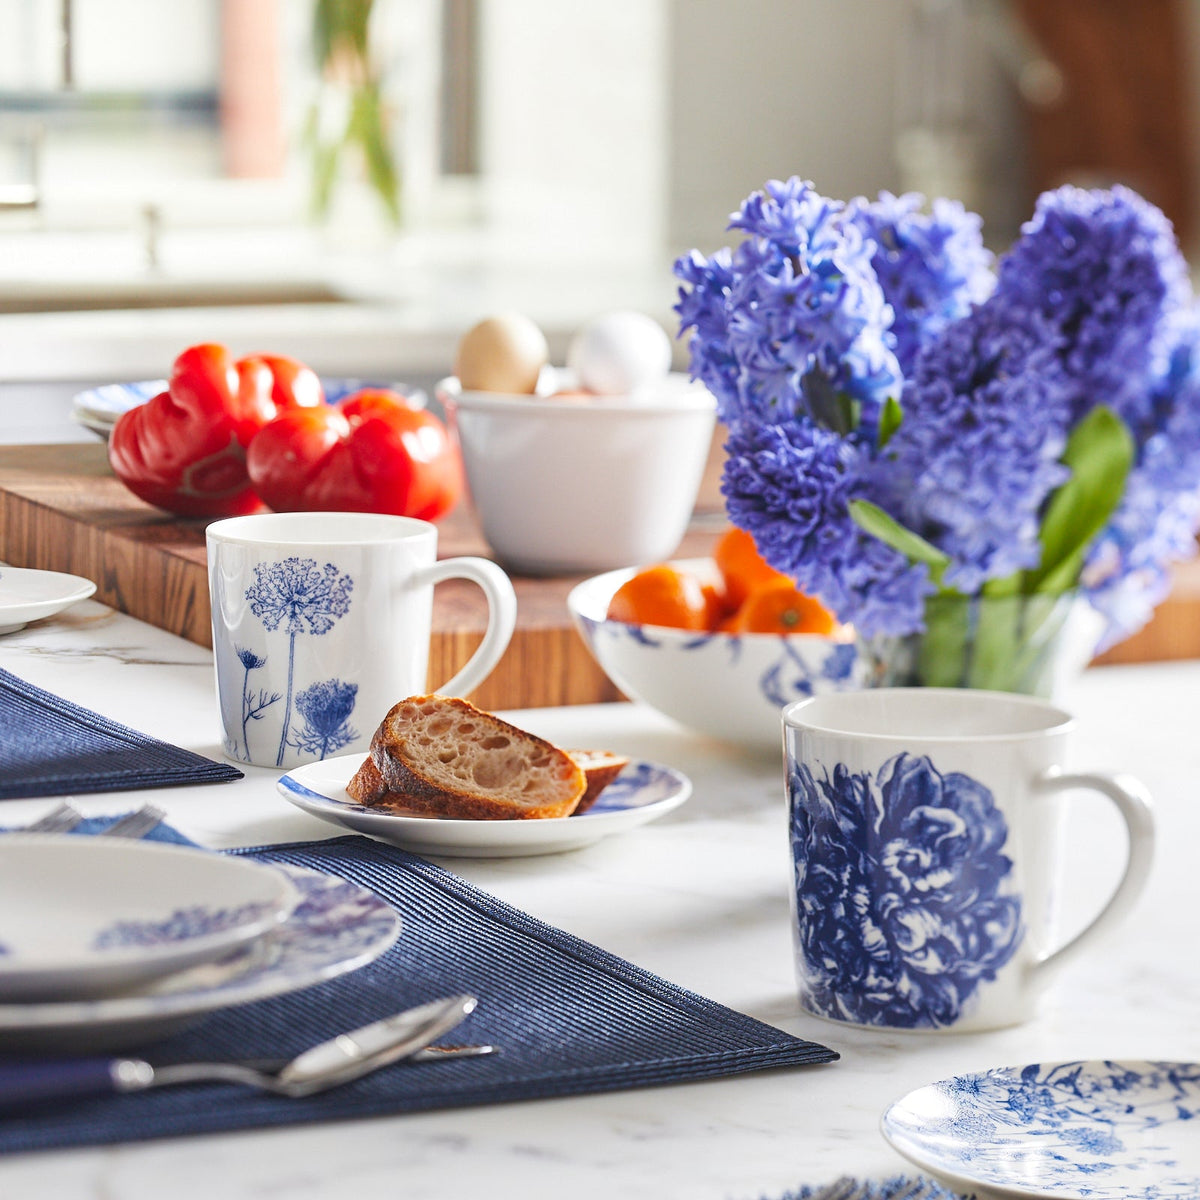 Bright kitchen table setting featuring Caskata Artisanal Home premium porcelain blue and white dinnerware, Peony mugs, fresh fruit, bread, and a vibrant bouquet of blue flowers.